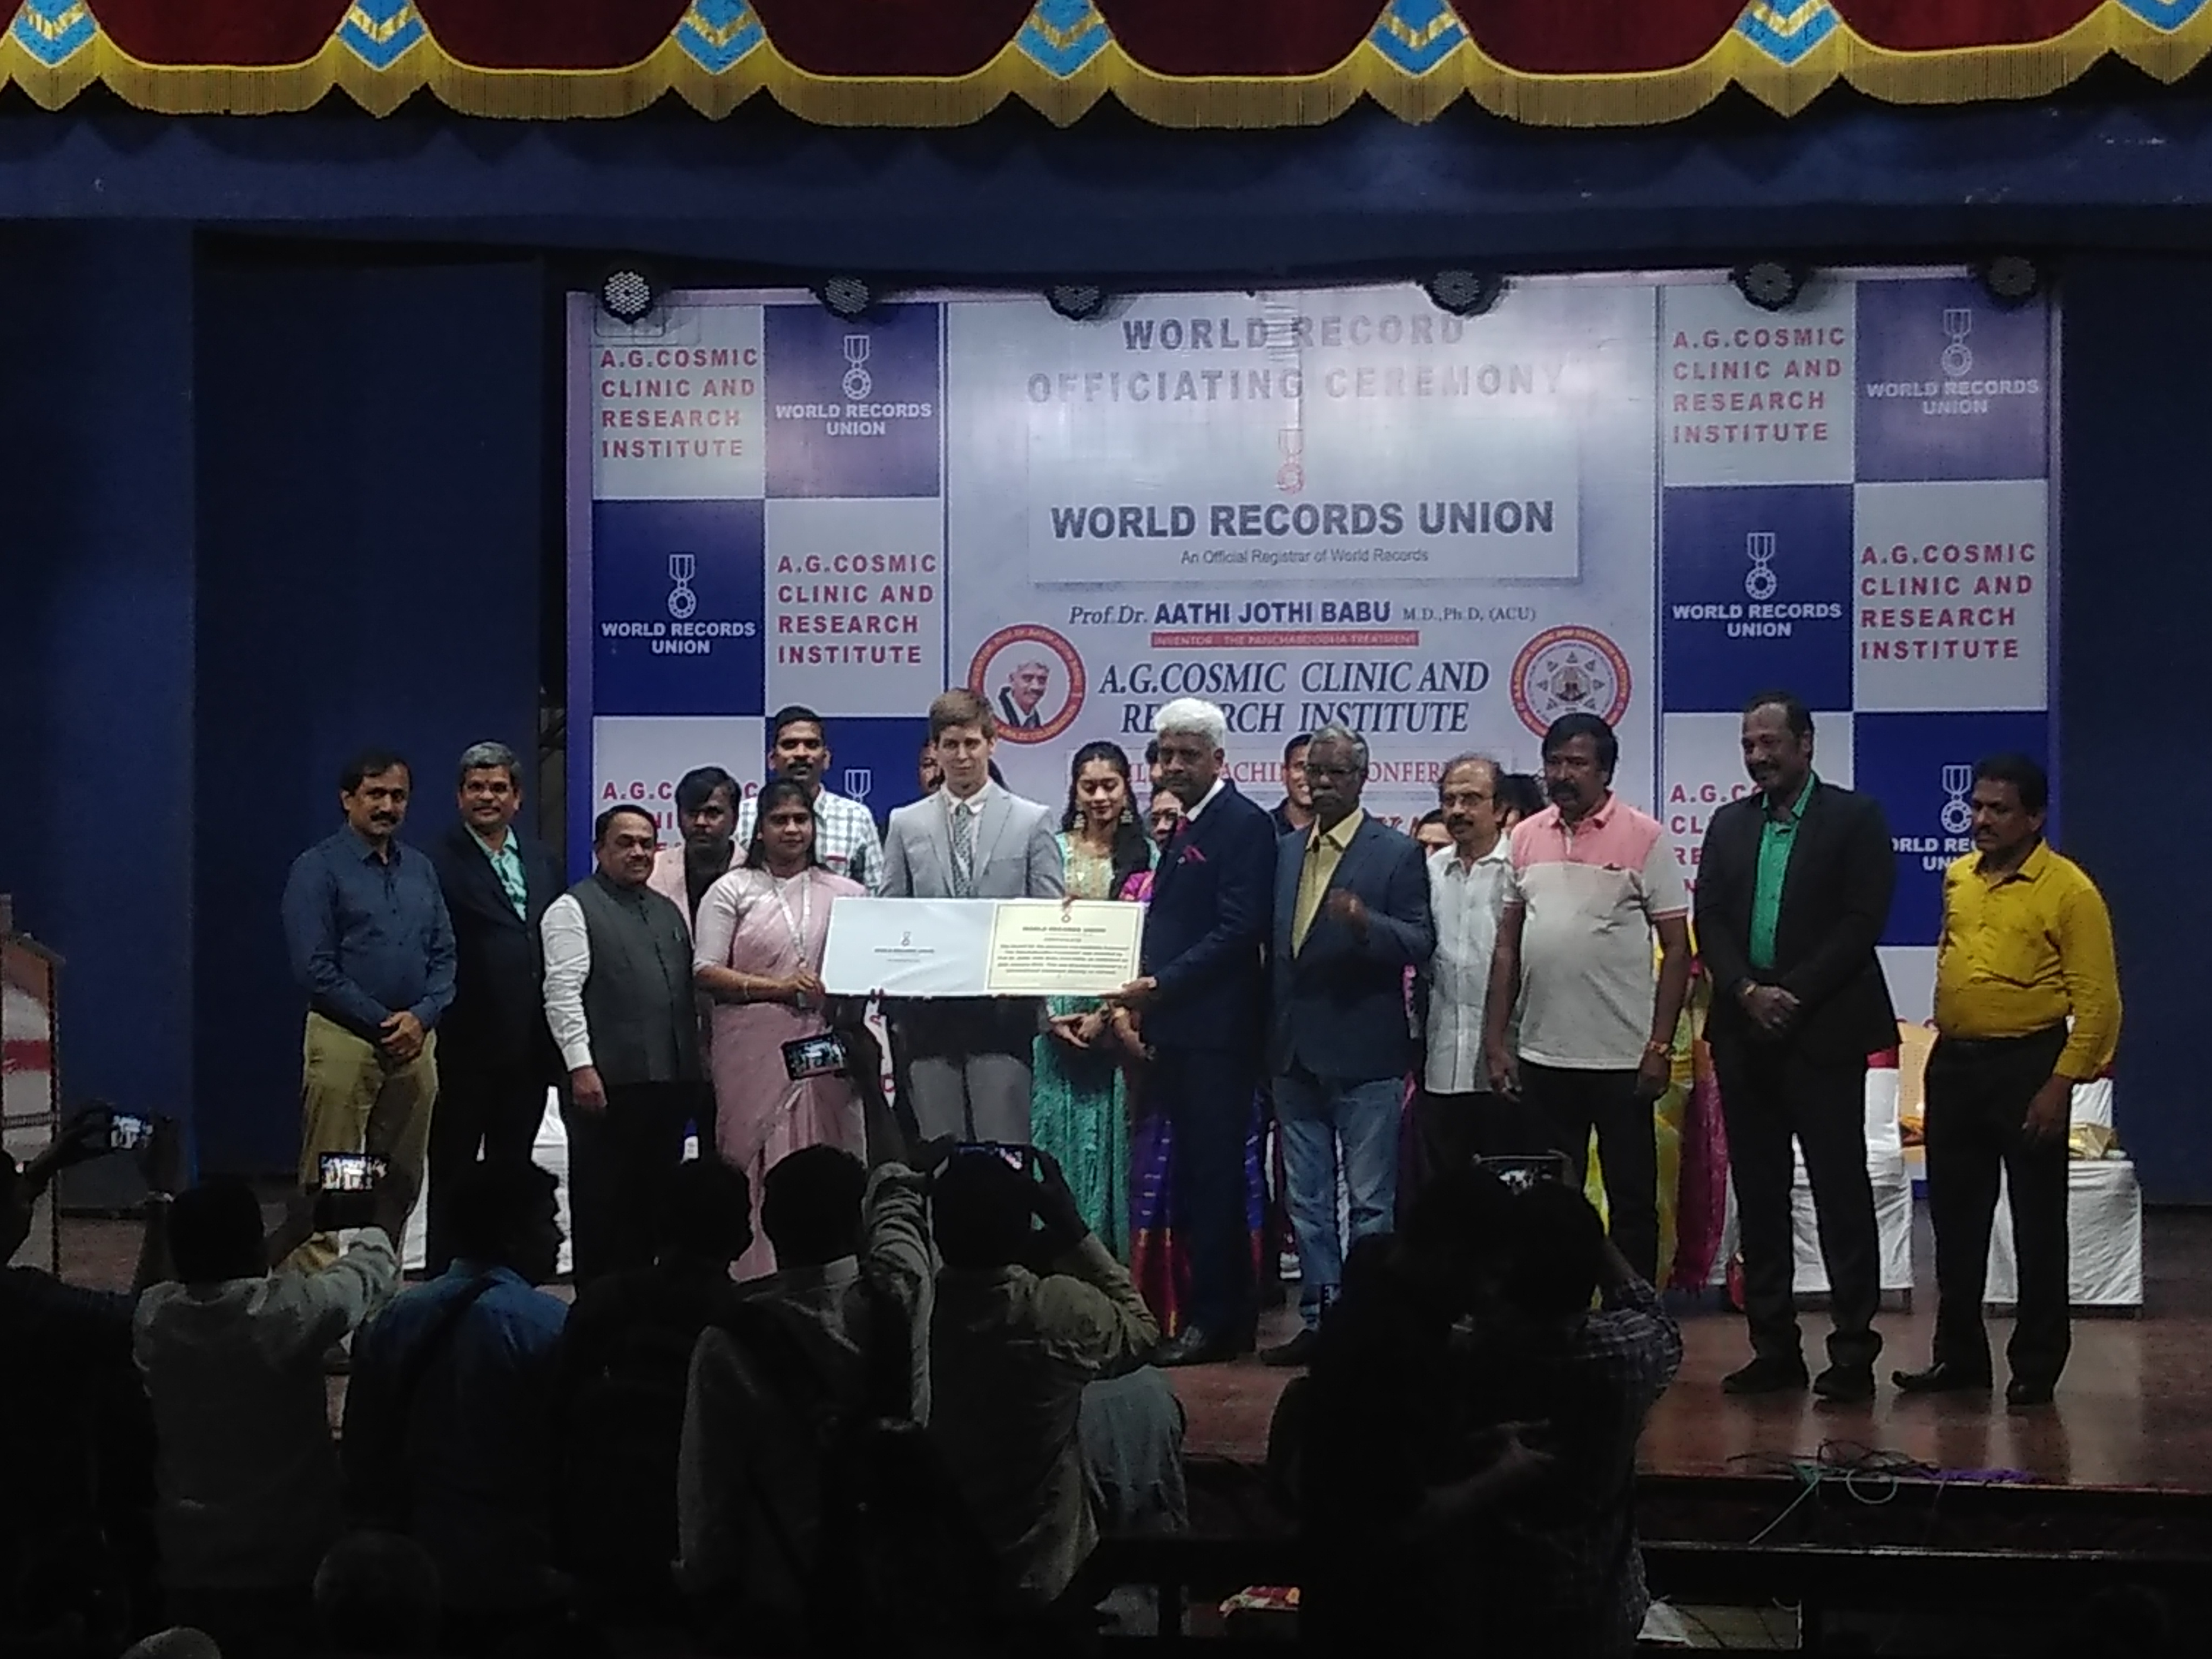 World Record Award for the Panchaboodha Treatment presented by Prof. Dr. Aathi Jothi Babu – Patented, Unique kind of Treatment in Non- Medical Treatment / Therapy